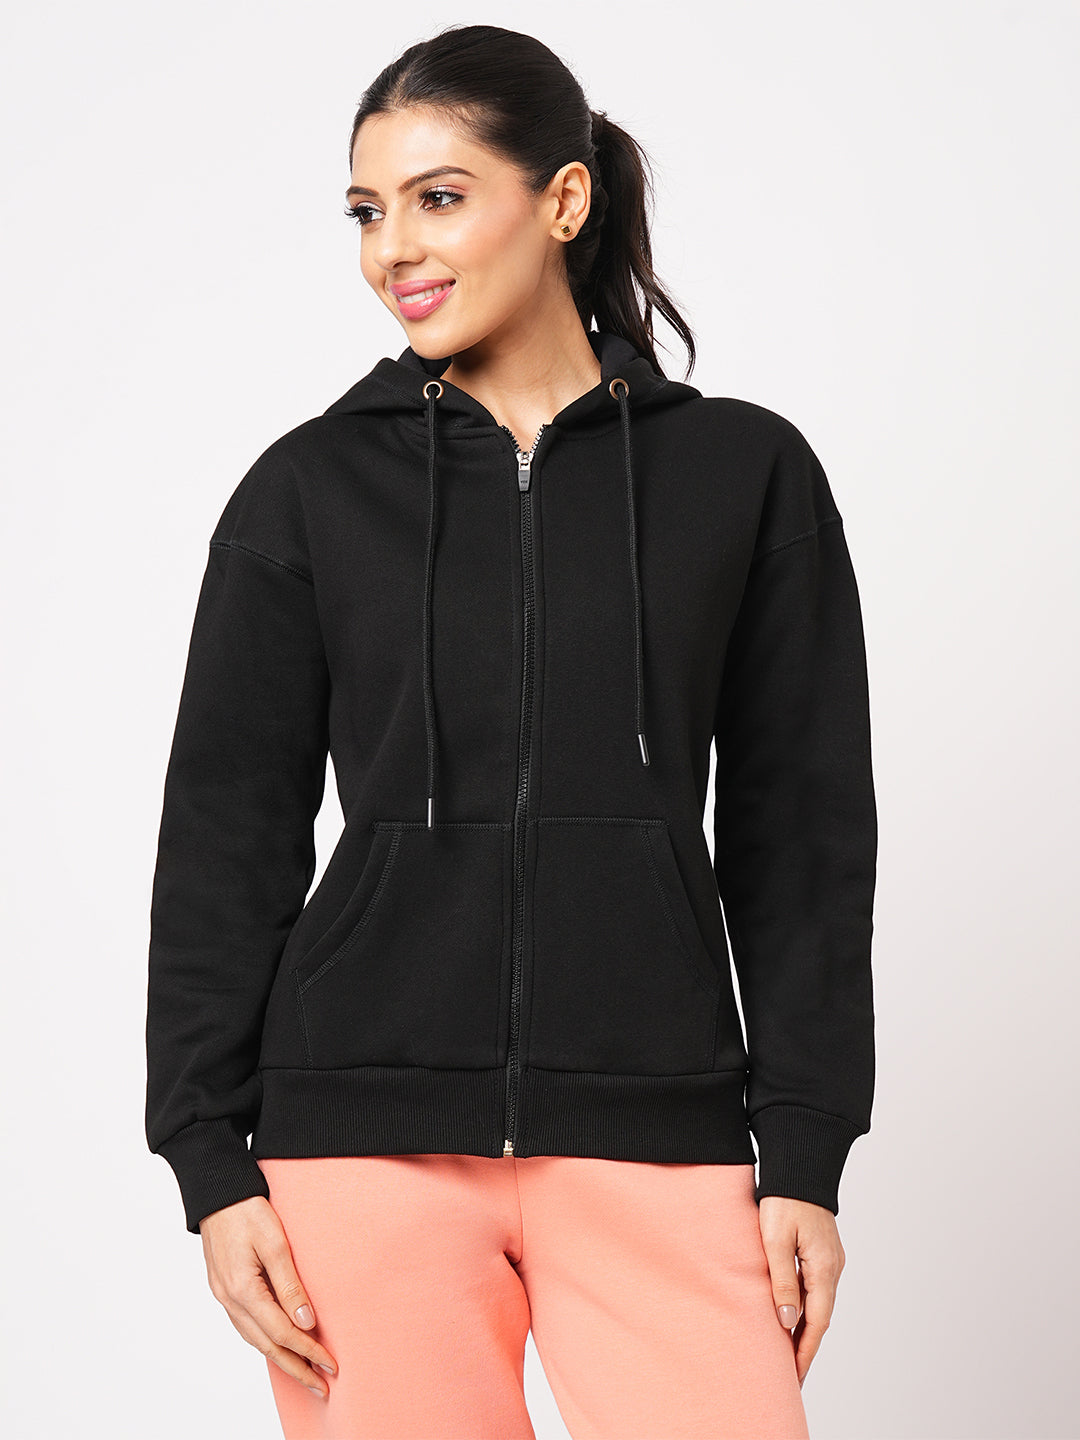 Bombay High Women's Solid Black Knit Hoodie Jacket